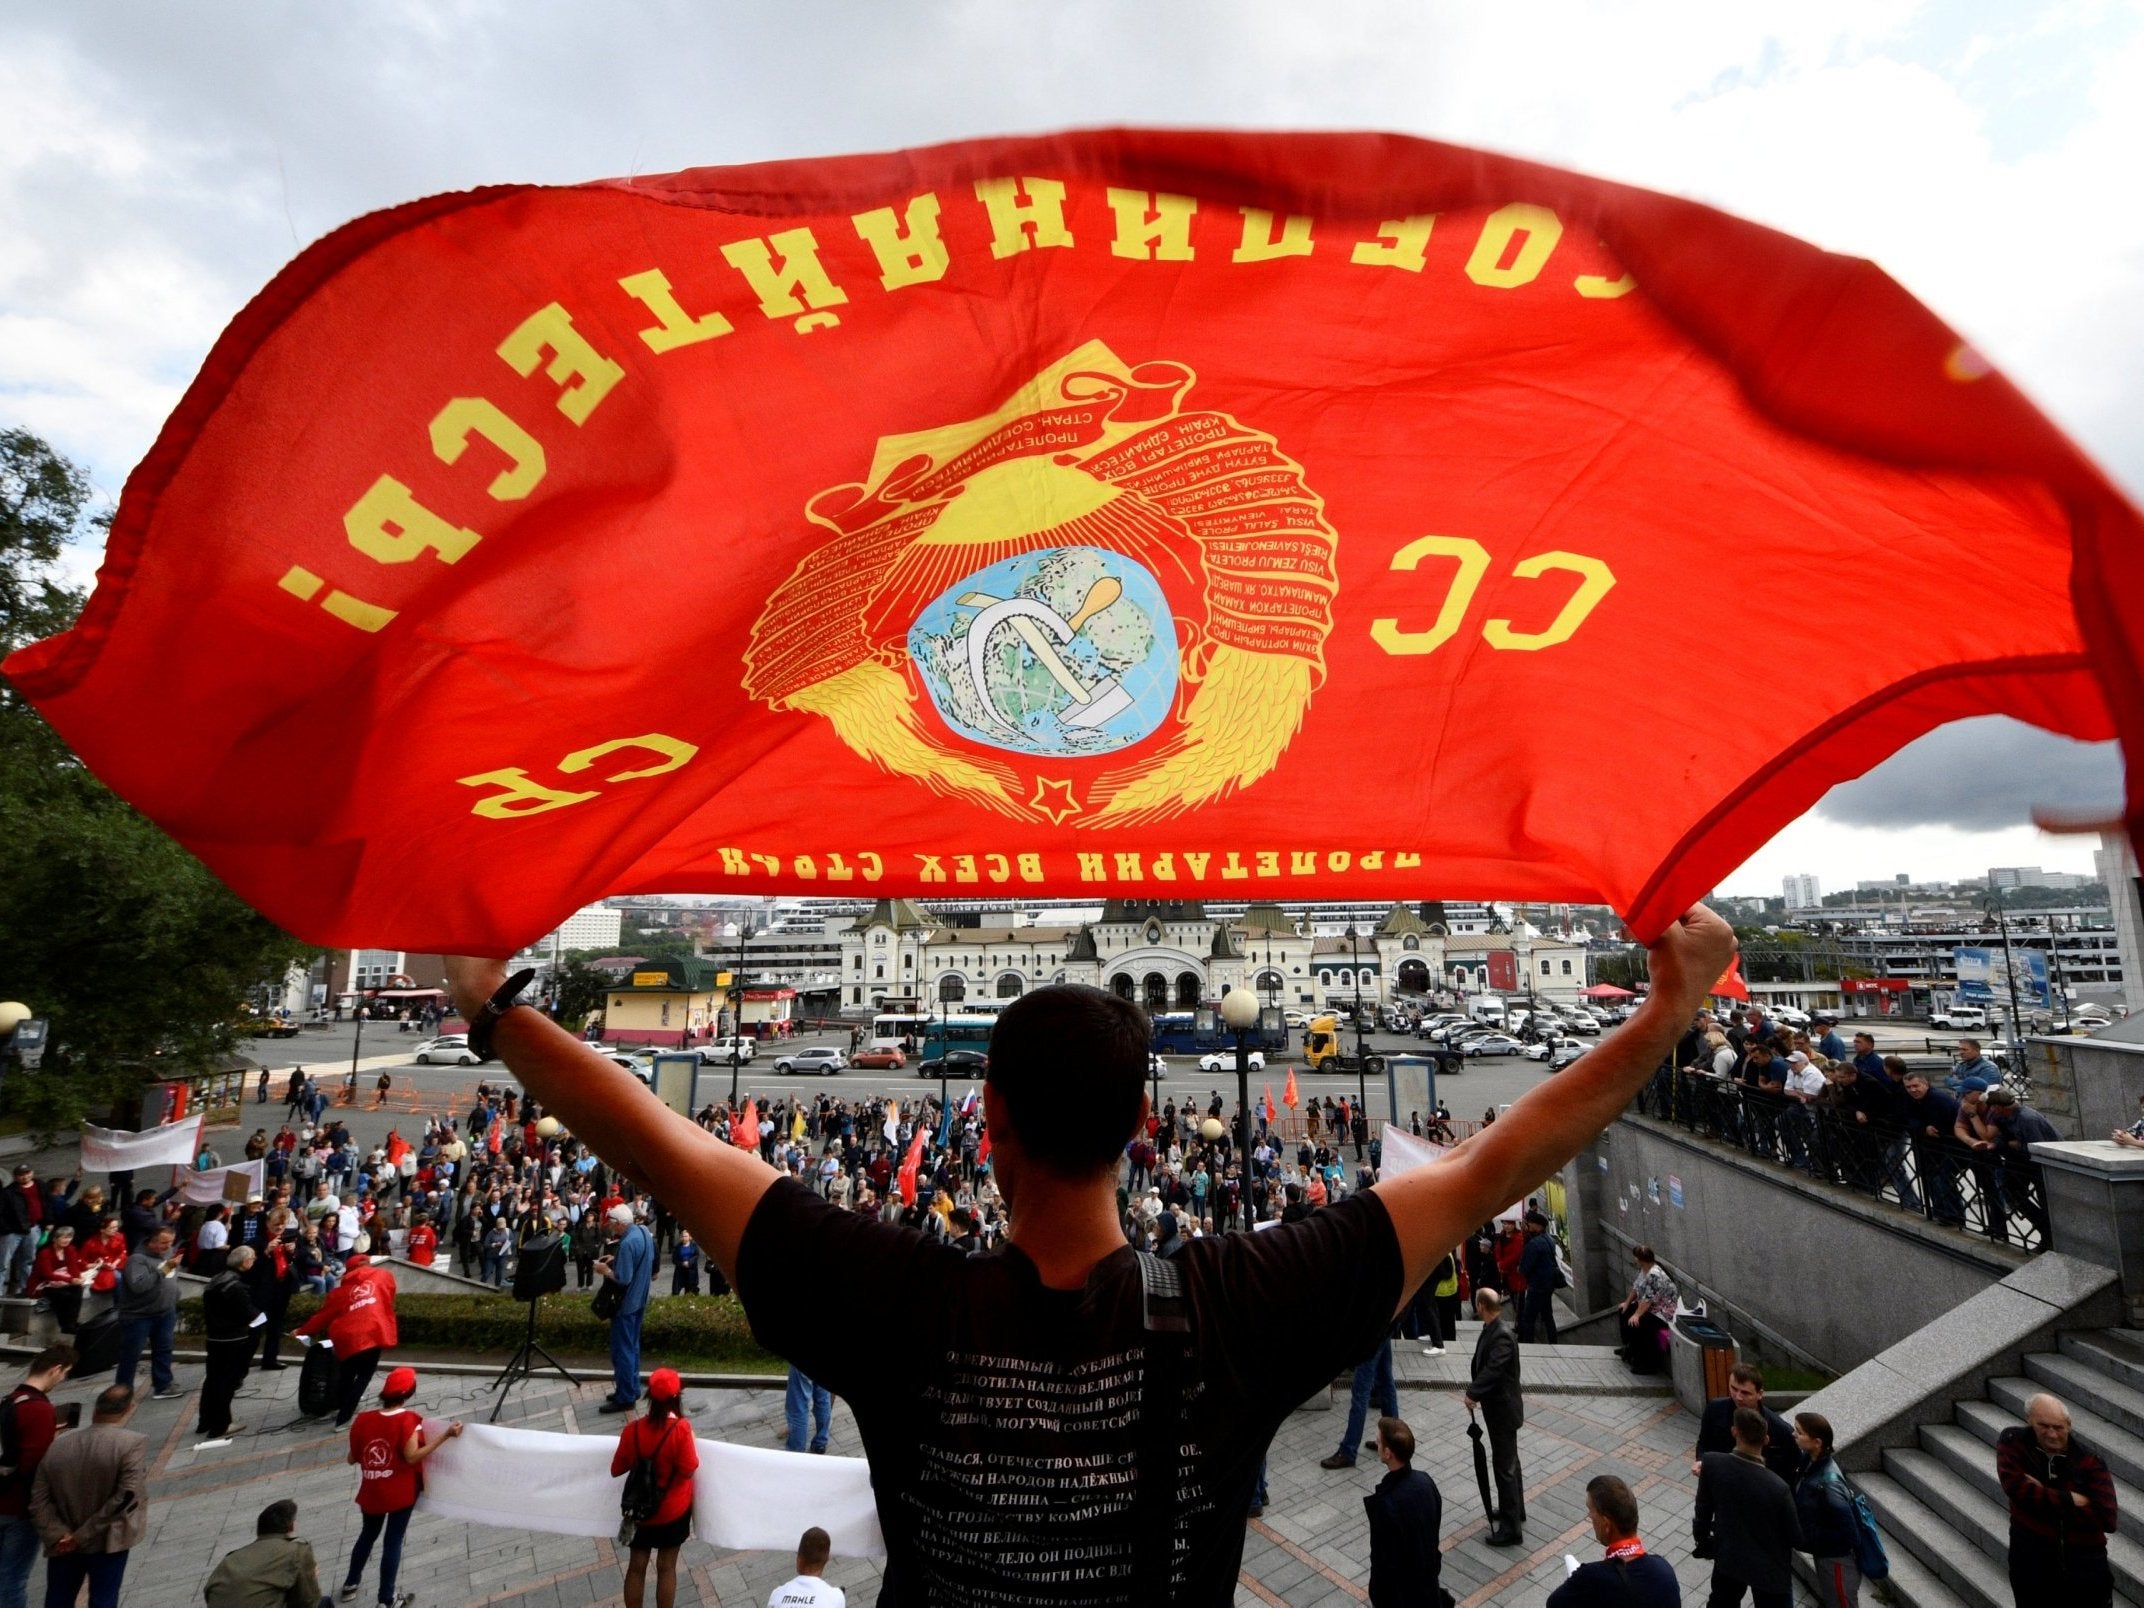 Communist Party supporters protested in Vladivostok